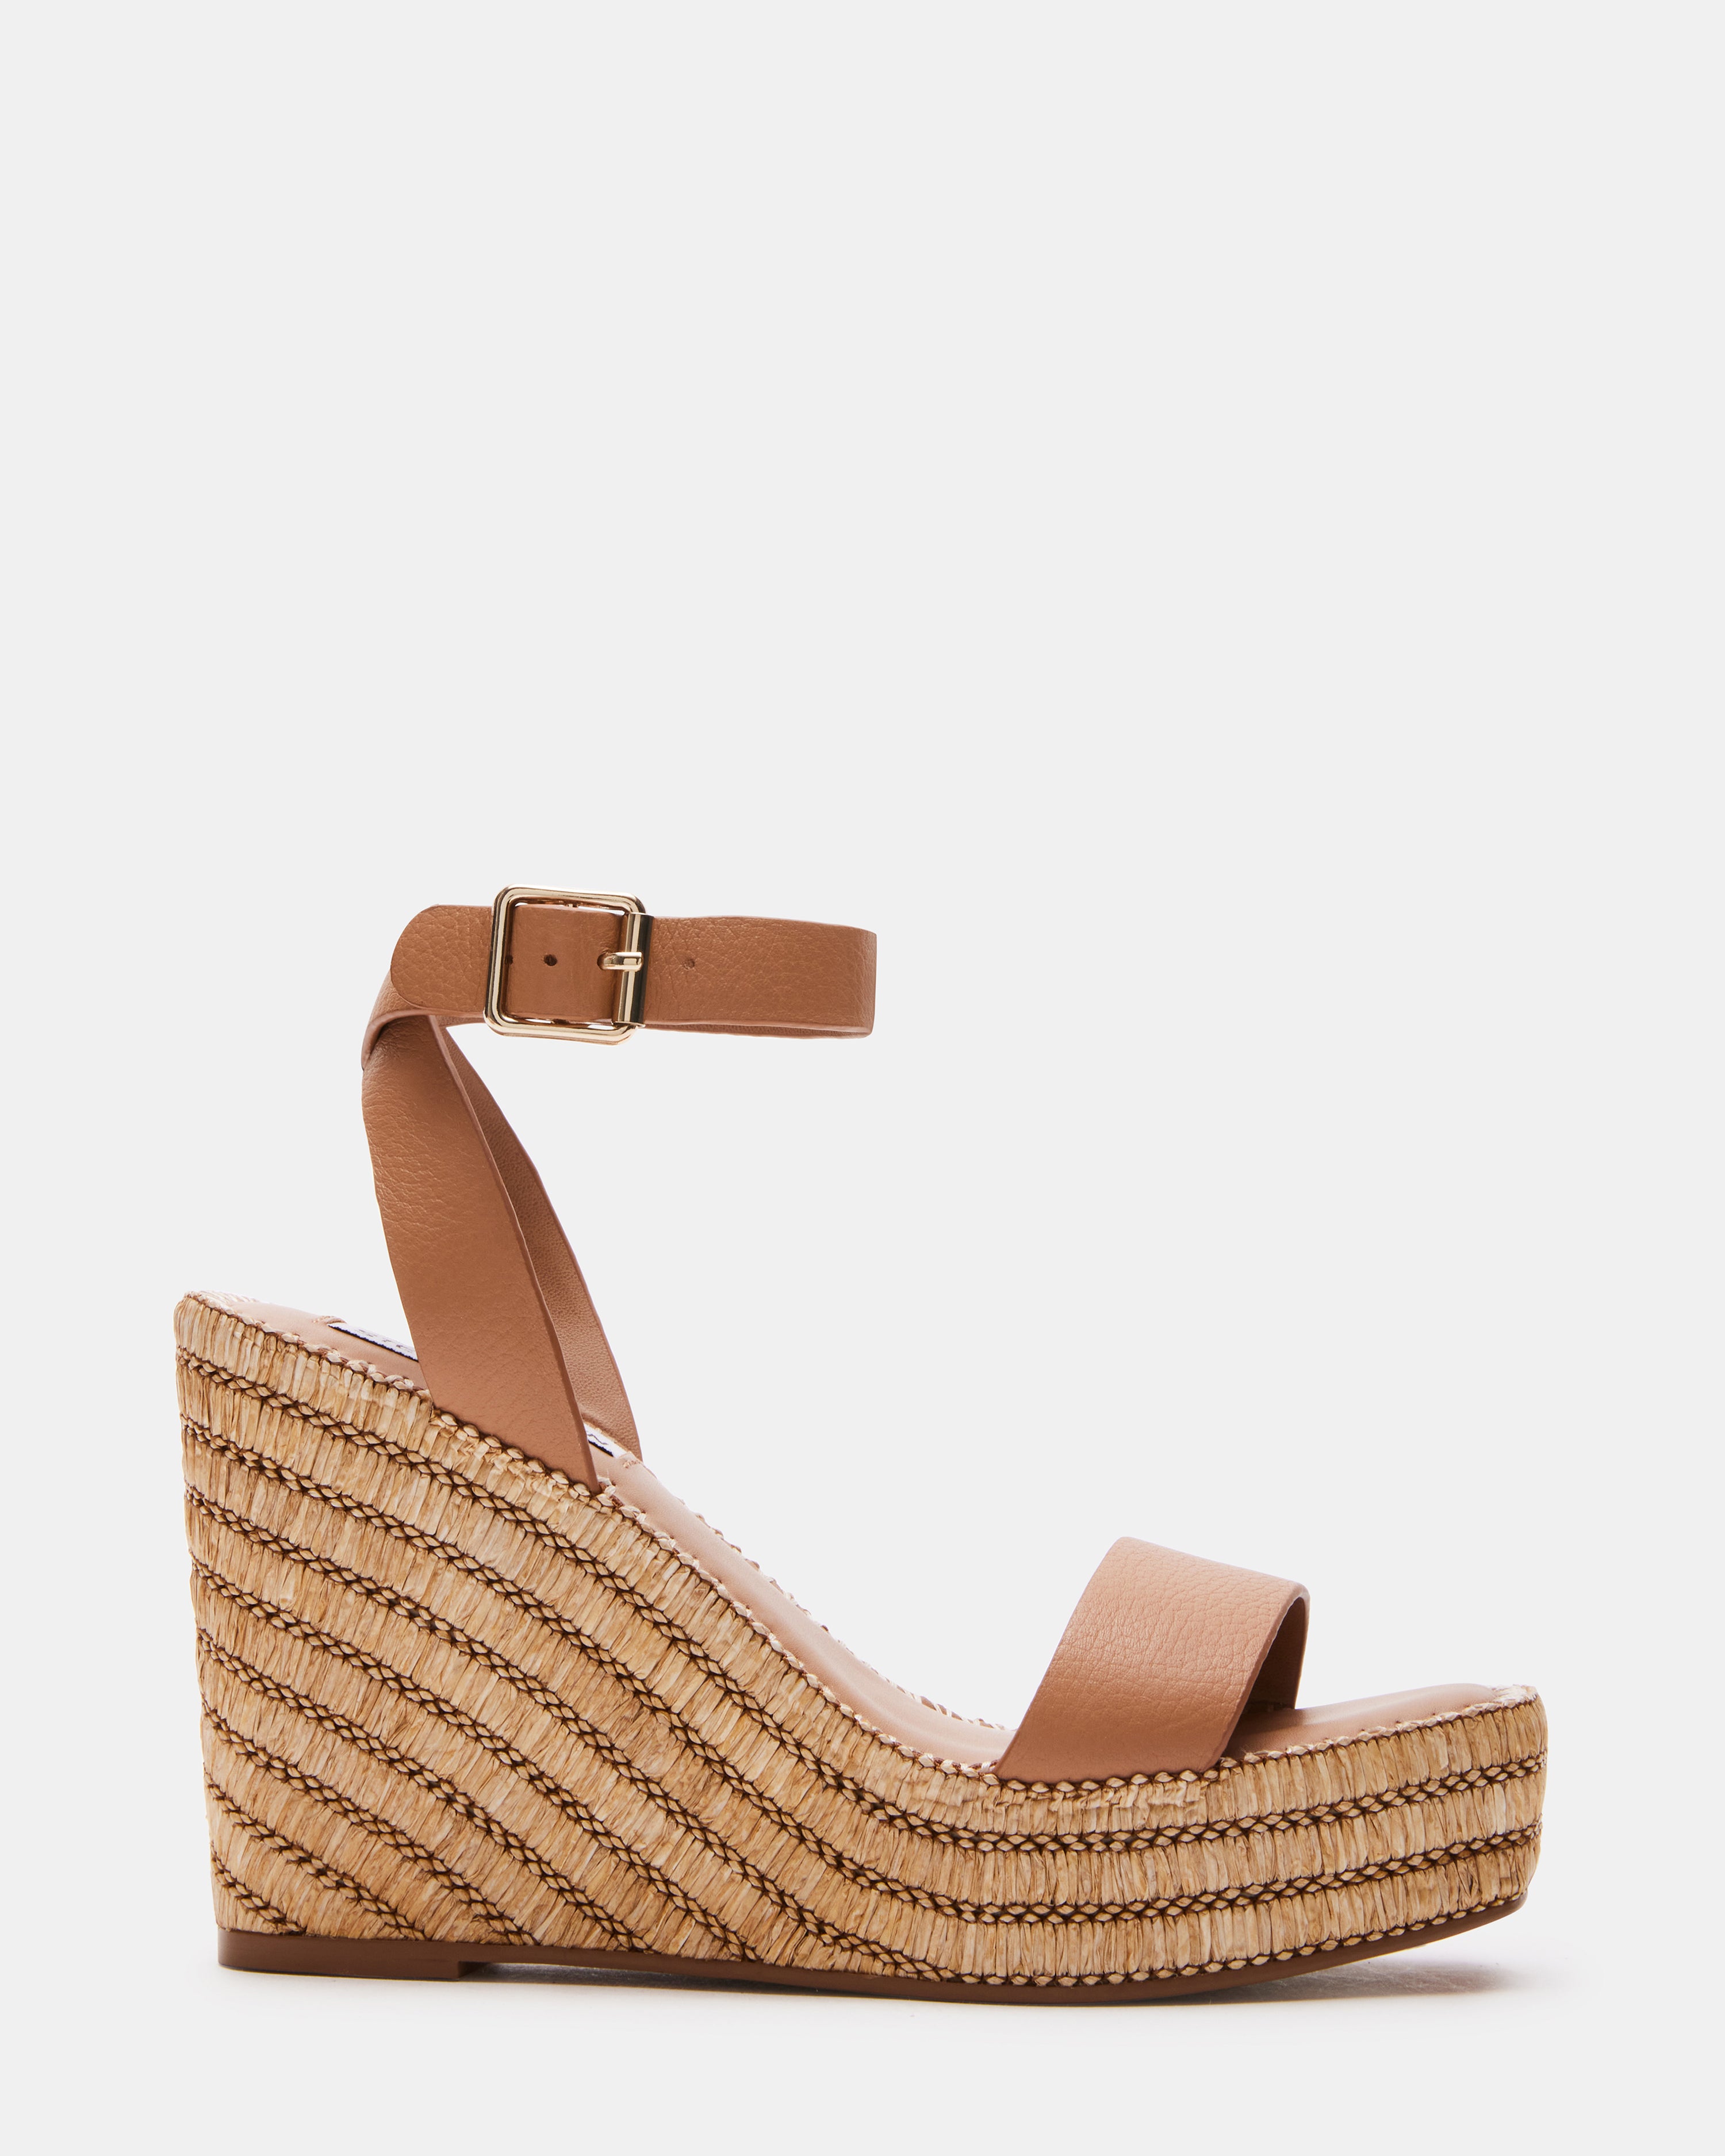 Woman's strap platform sandal in white and tan brown leather with braided  wedge heel 9